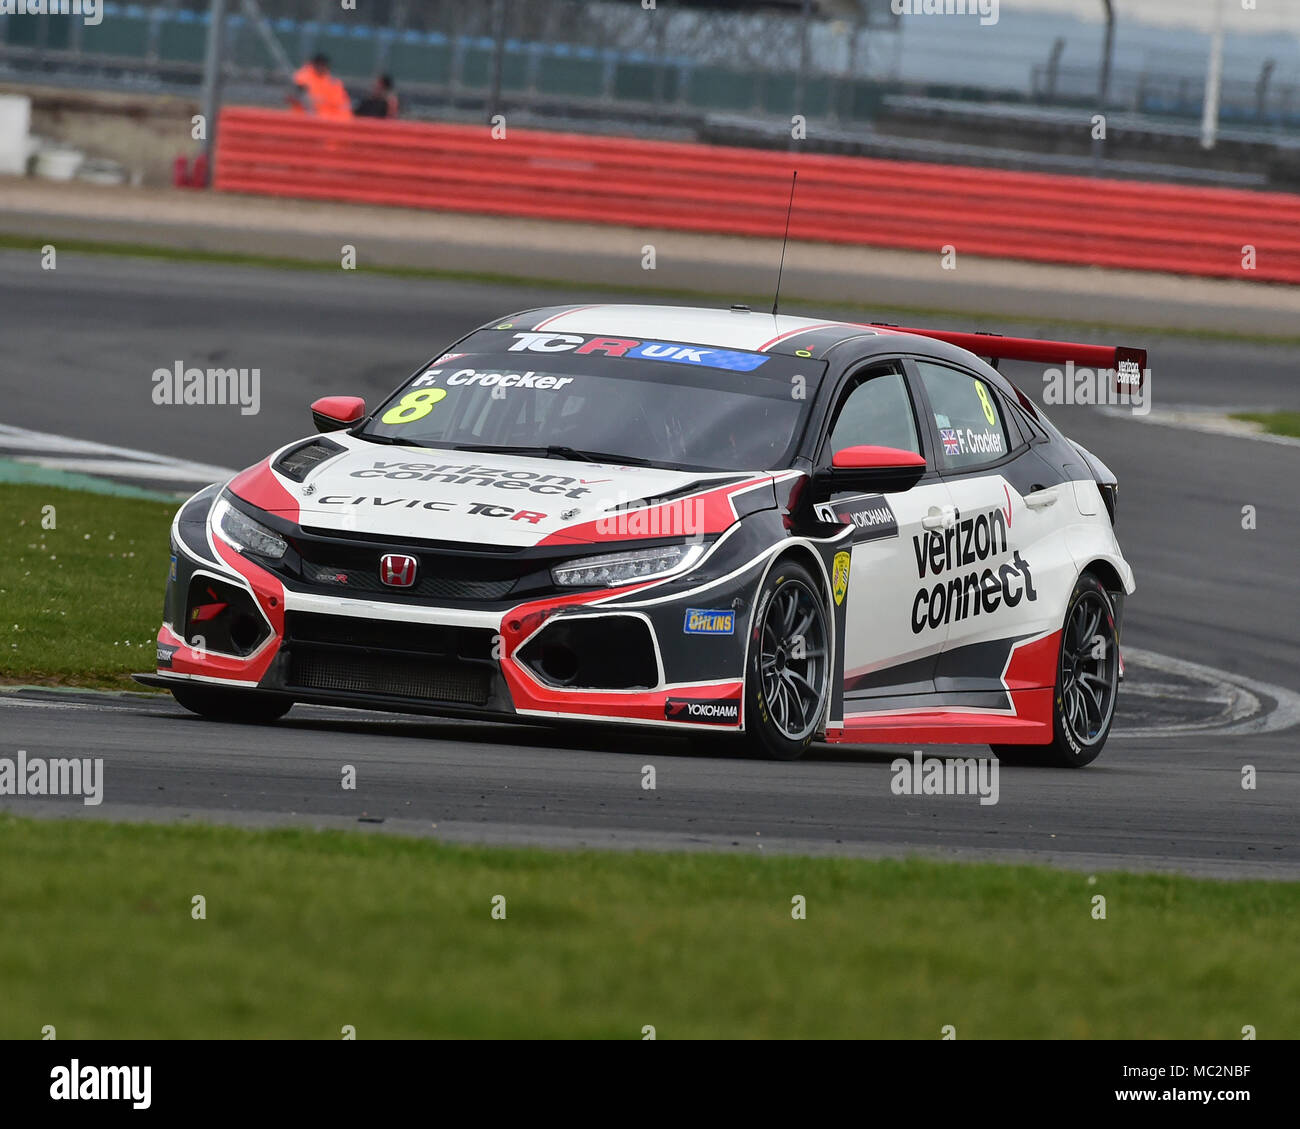 Silverstone Towcester Northamptonshire England Sunday 1st April 18 Finlay Crocker Honda Civic Type R Tcr In The Inaugural Tcr Uk Race Weekend Stock Photo Alamy